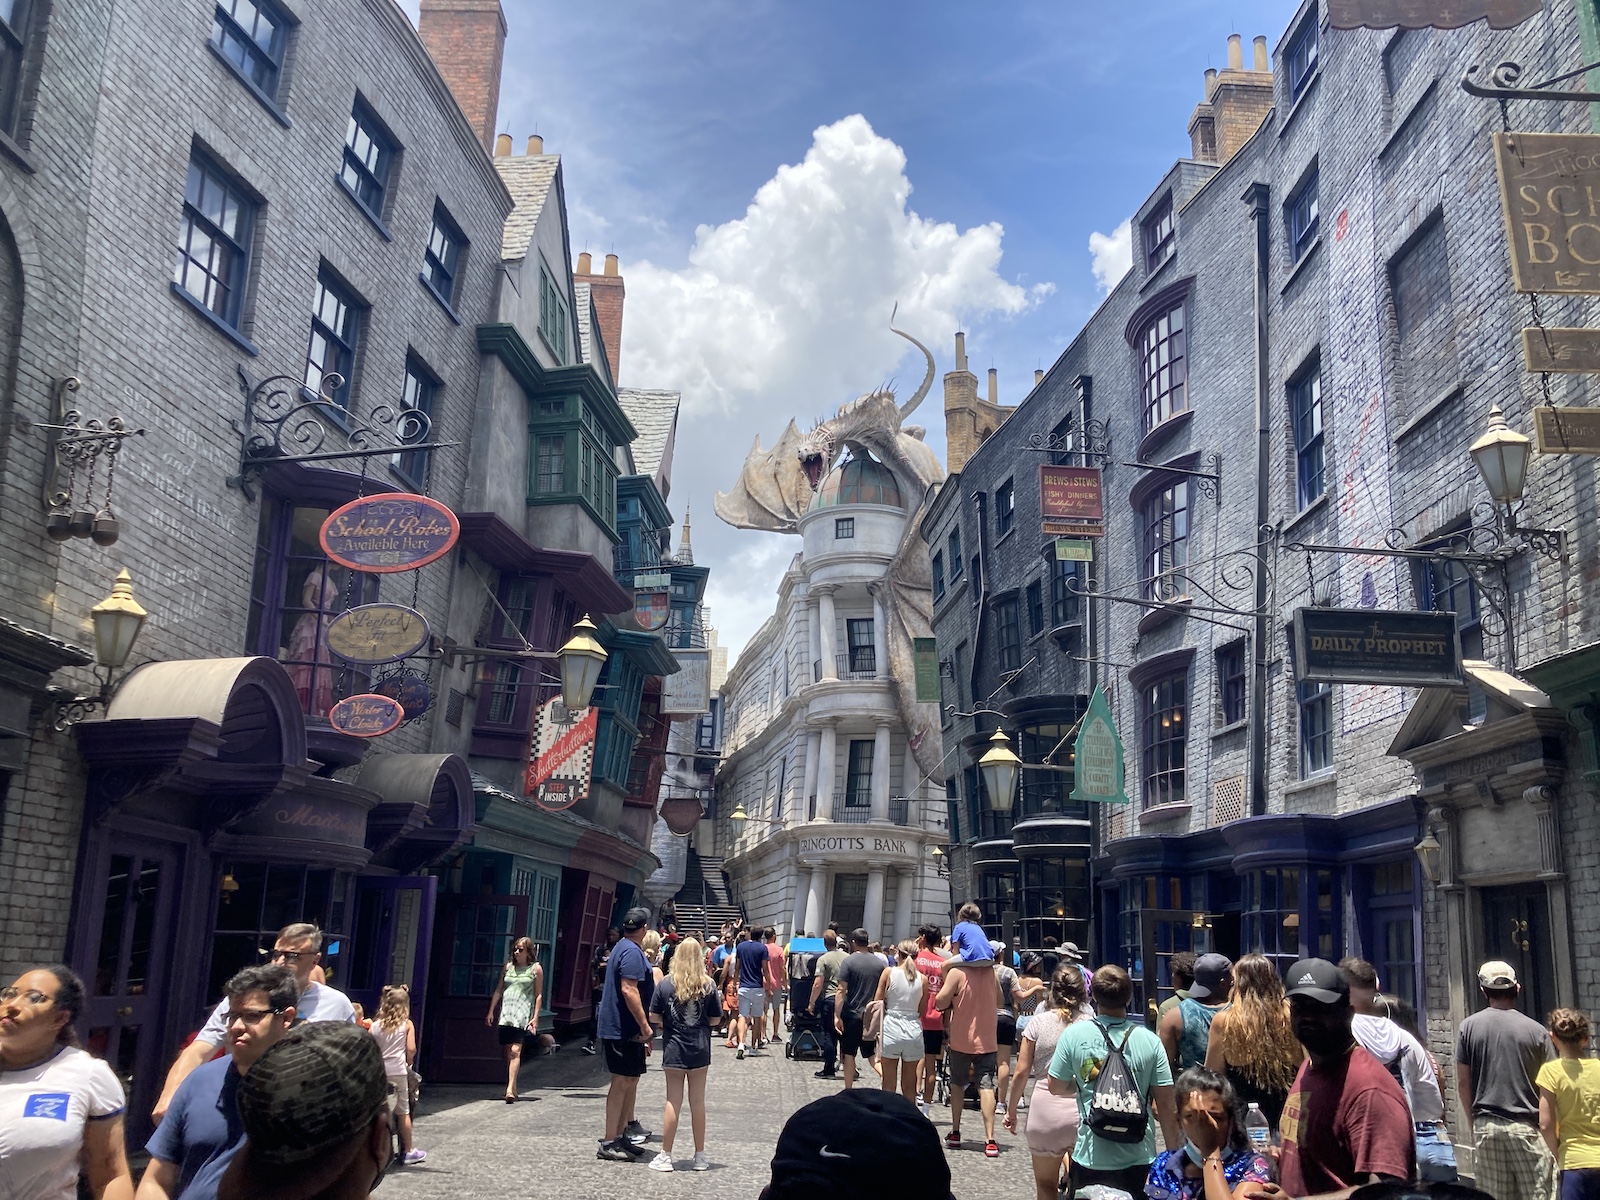 What's It Like At Universal Studios Orlando Now? My Recent Experience